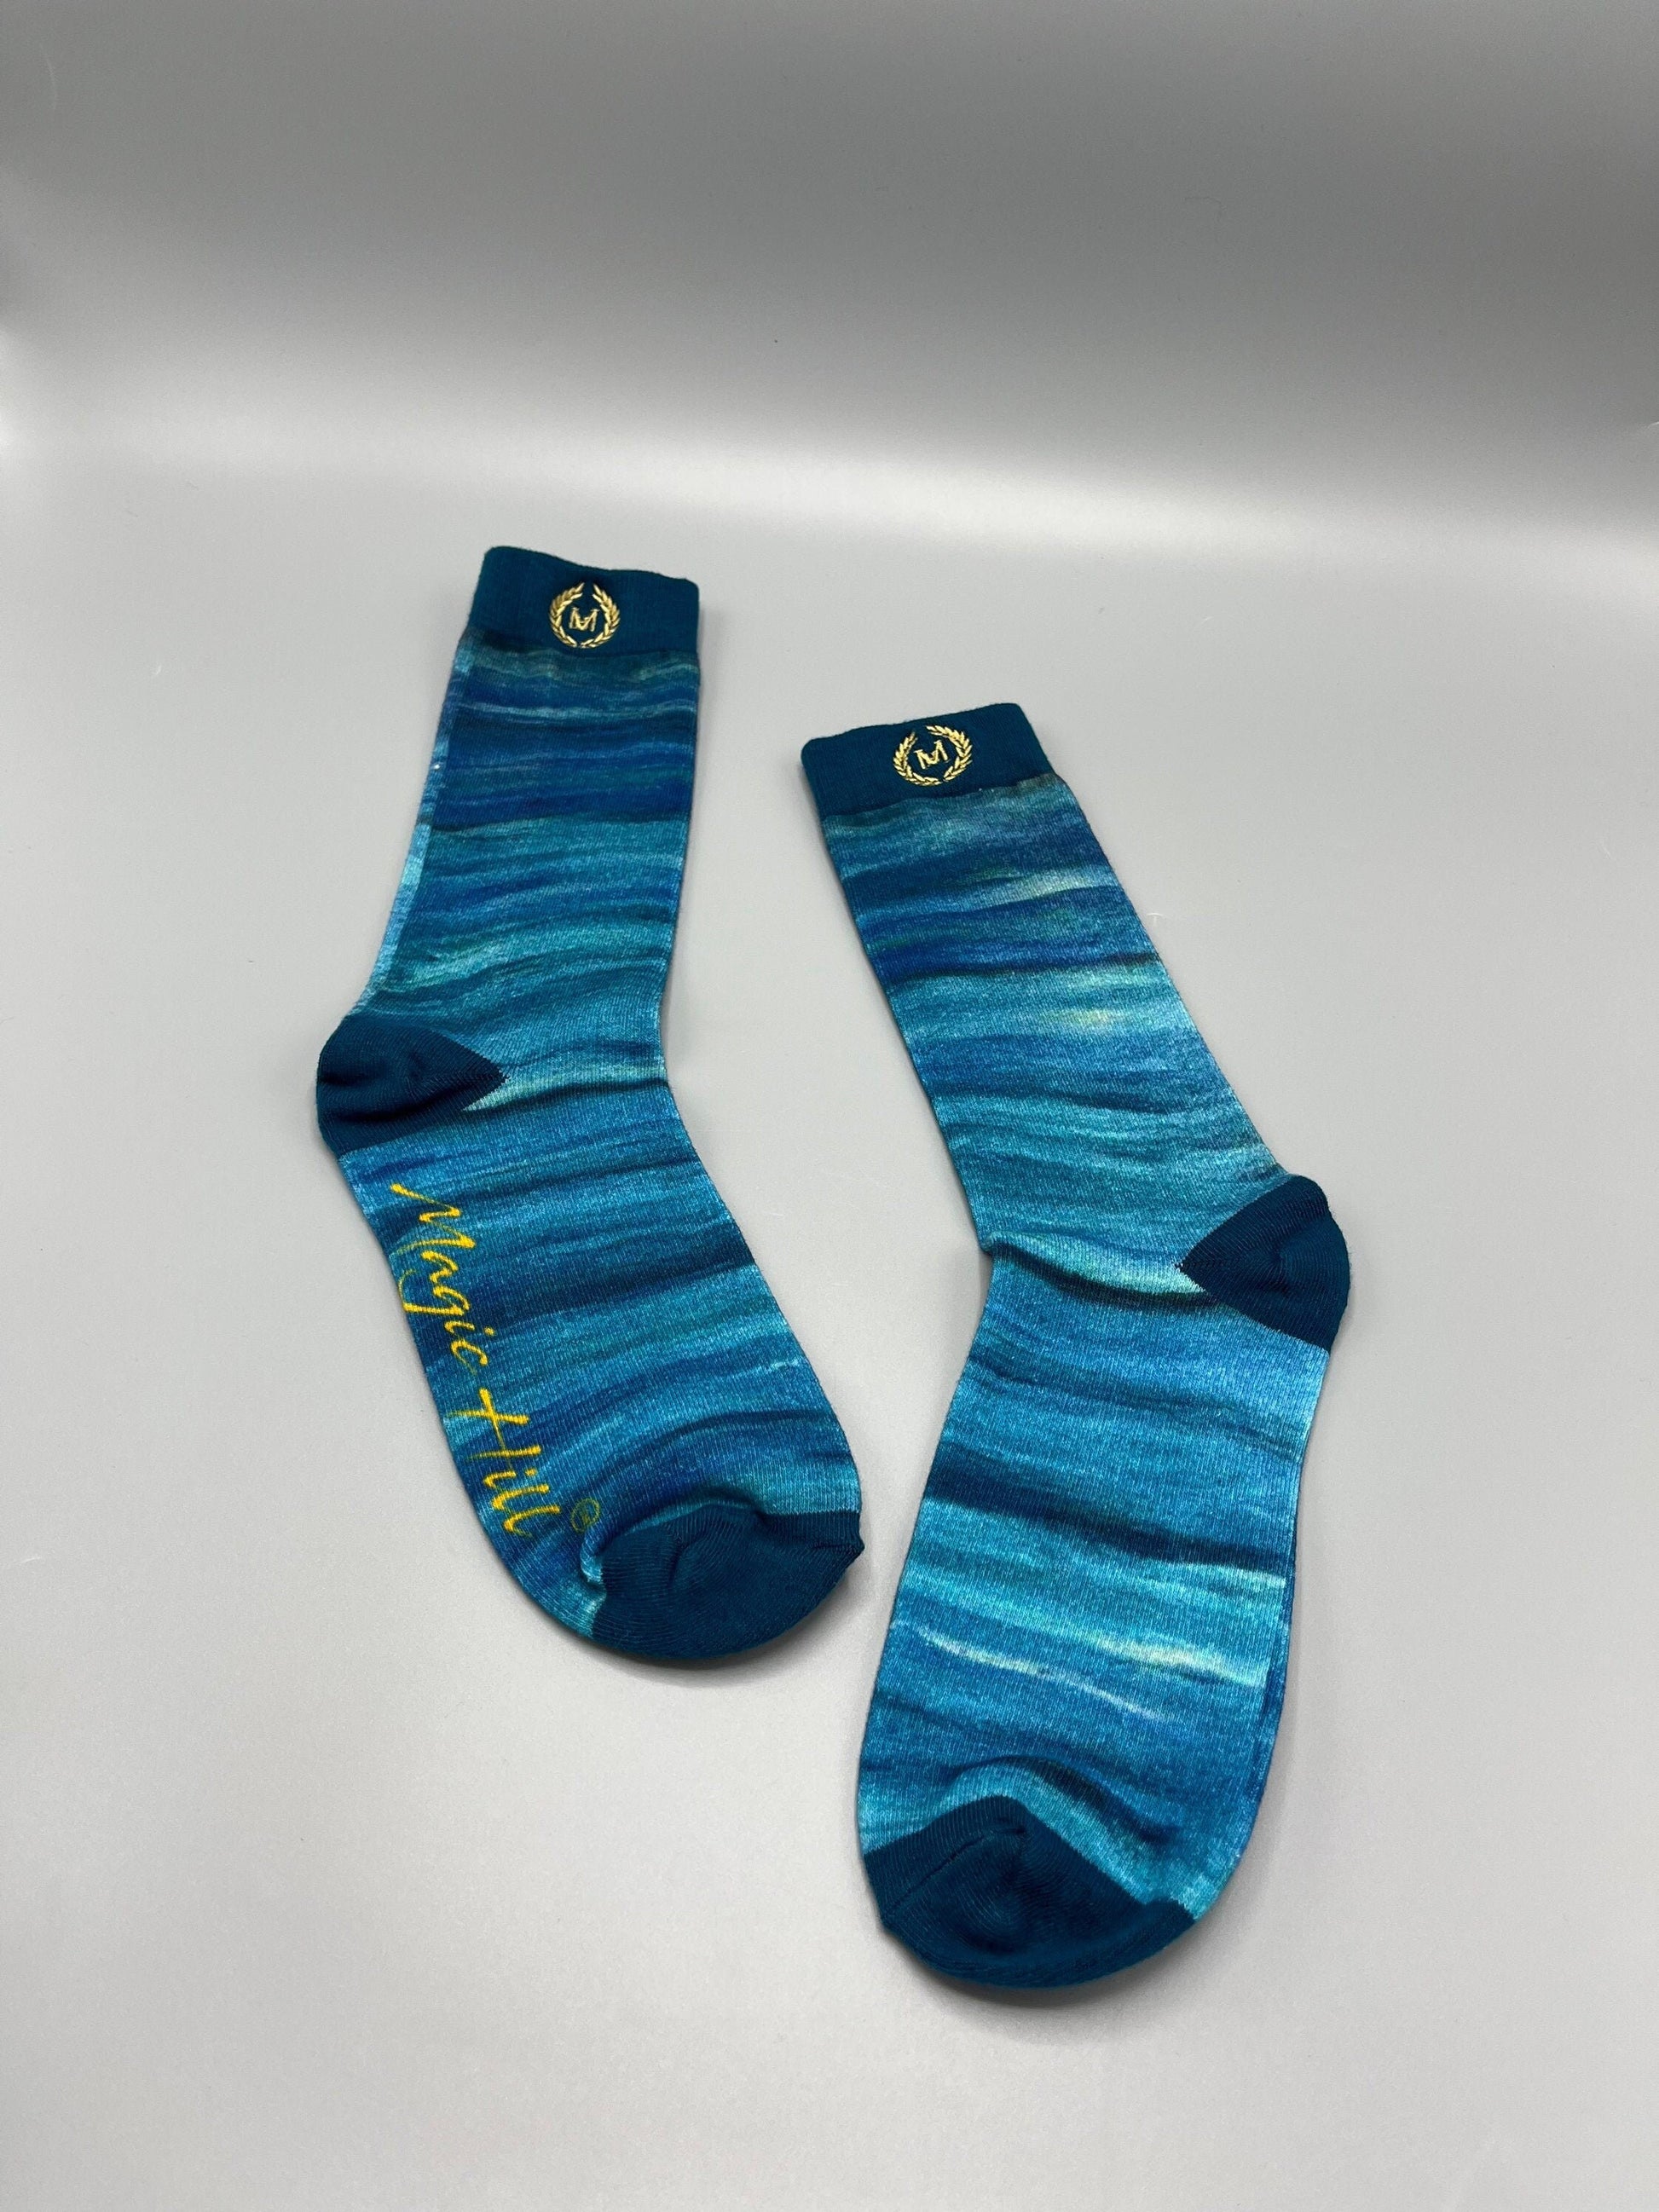 Bruce Mishell’s Dressy Socks Collection100% cotton perfect for the summer or winter. Feels great on the skin.